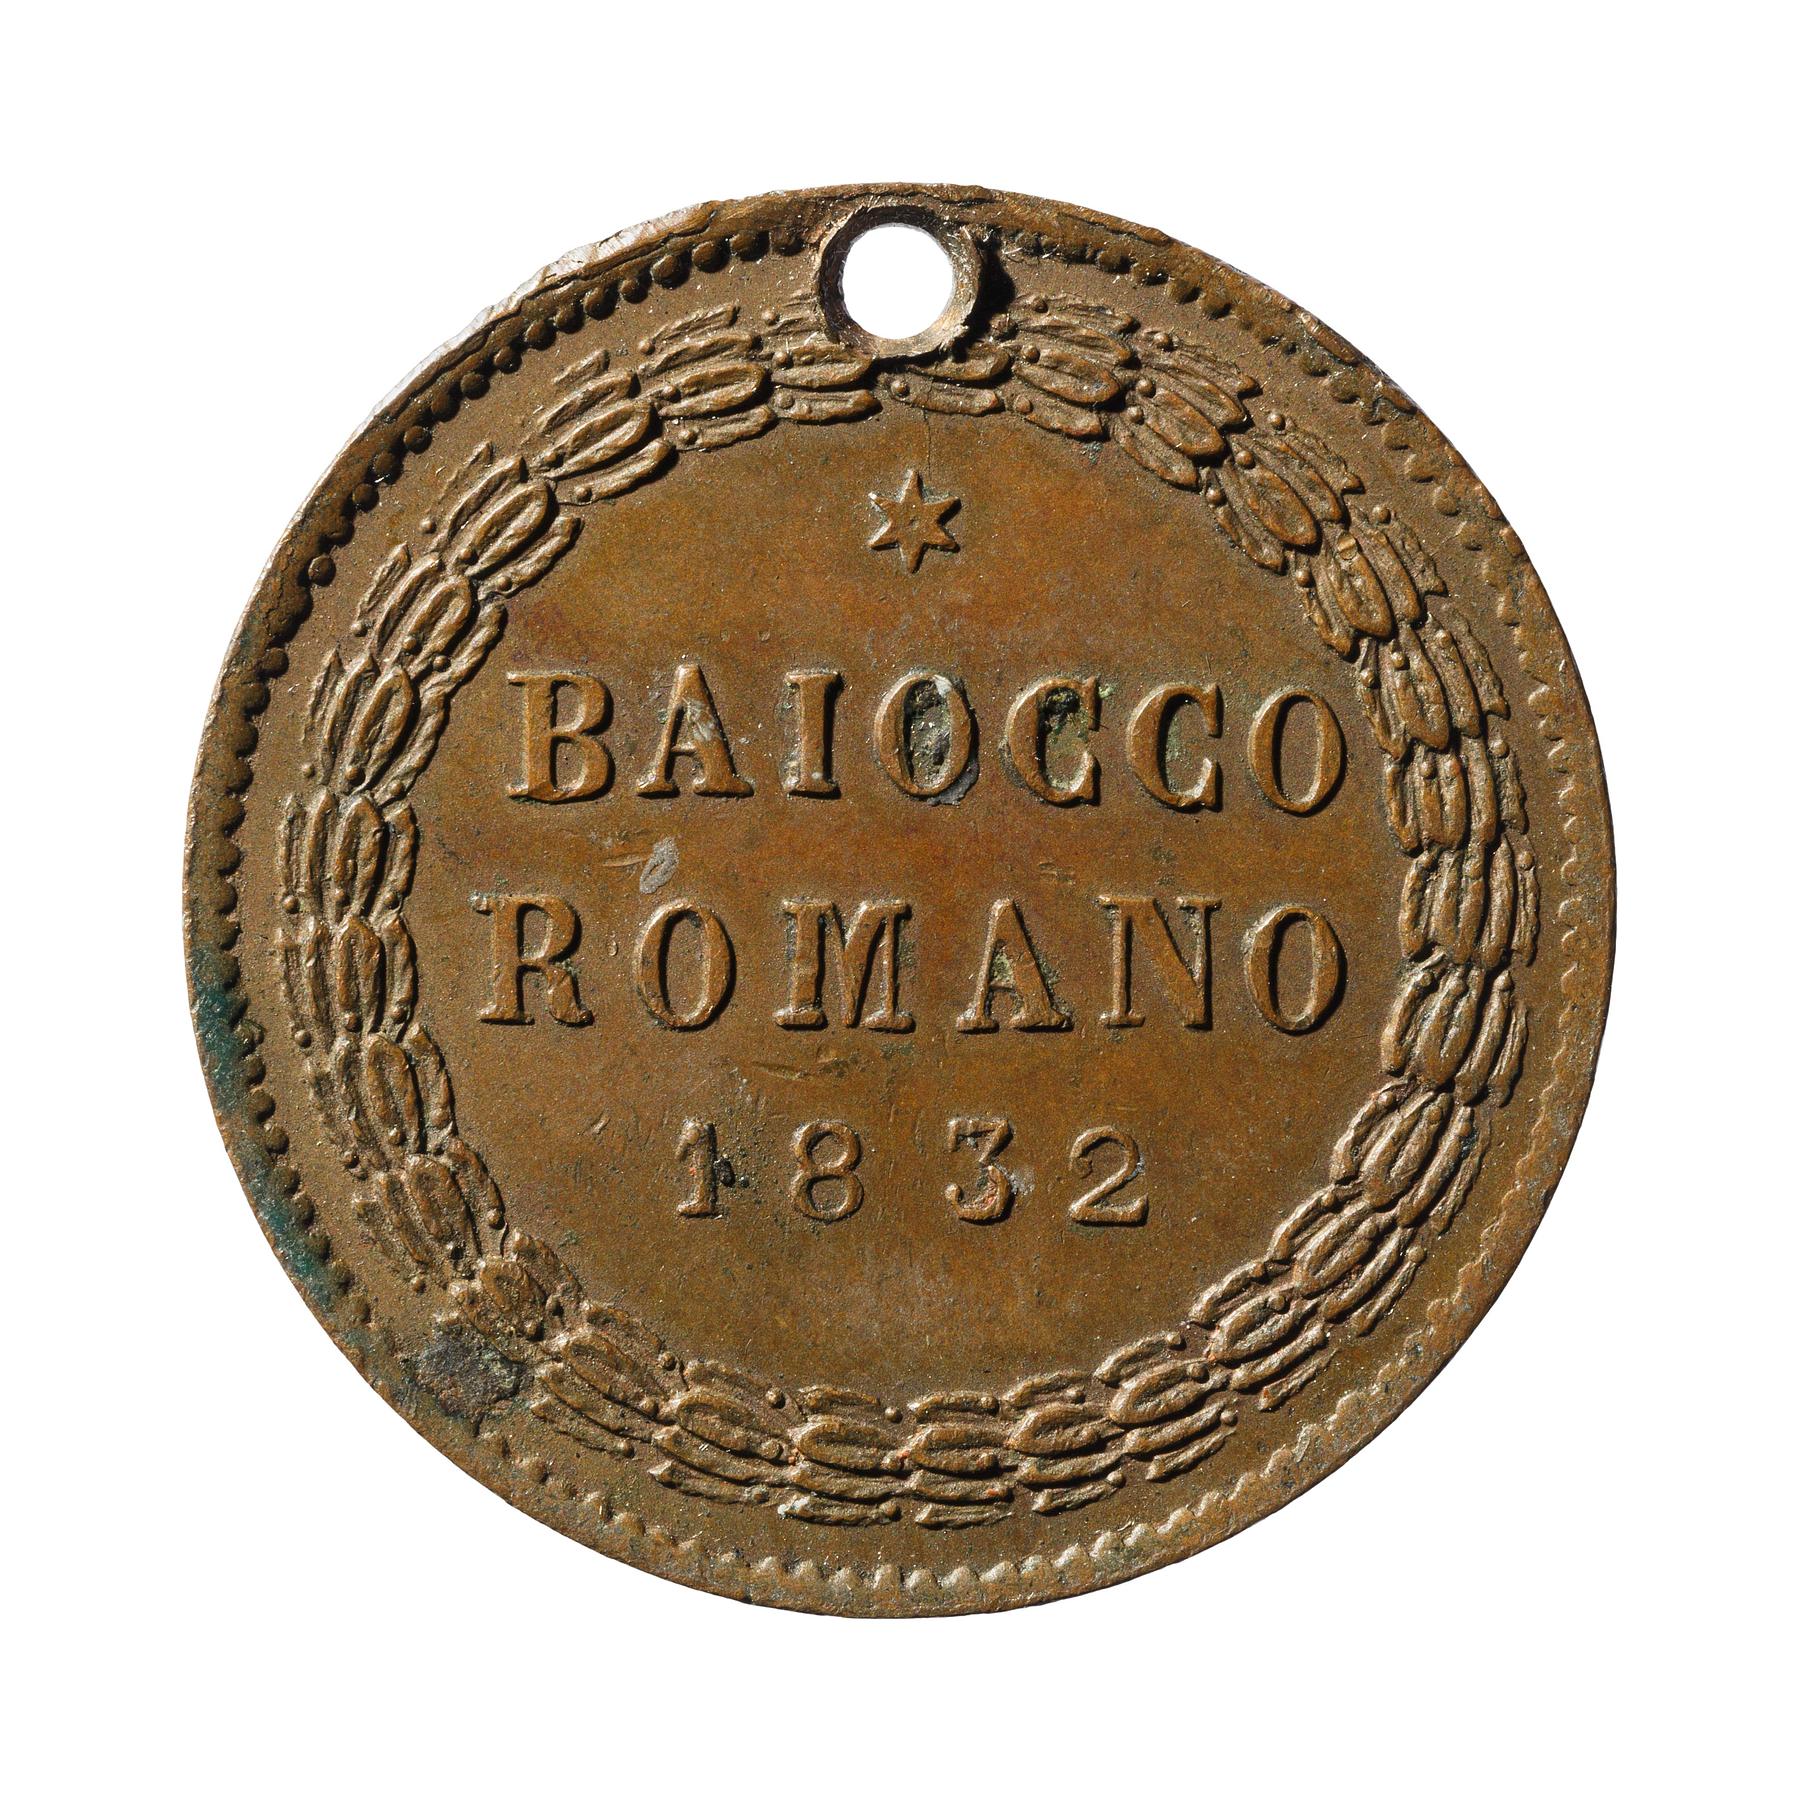 The Baiocco Order of the Ponte Molle Society, N90